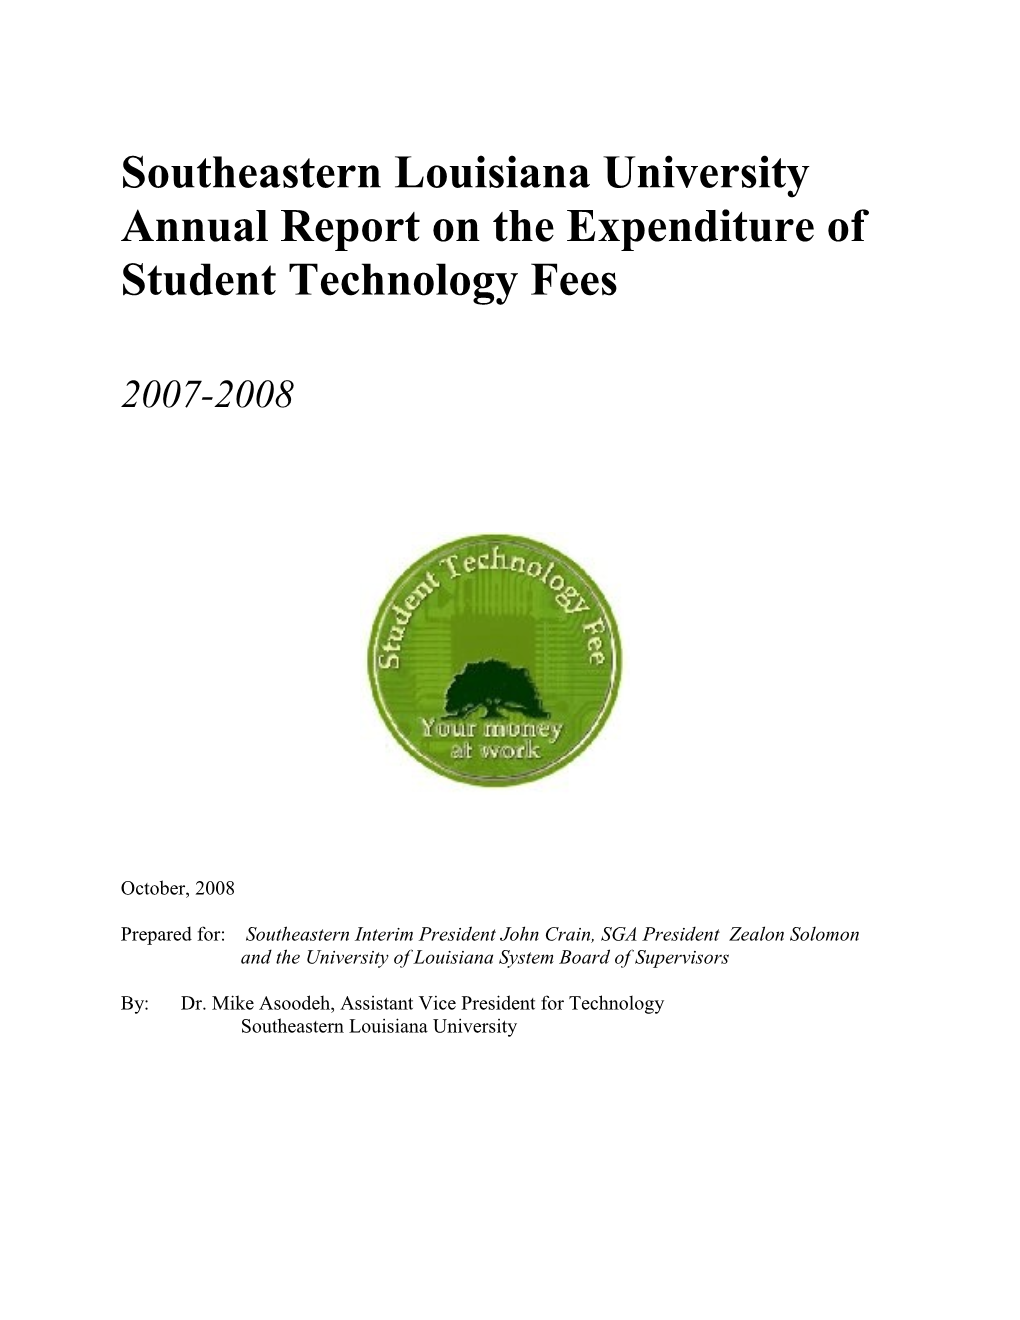 Southeastern Louisiana University Annual Report on the Expenditure of Student Technology Fees